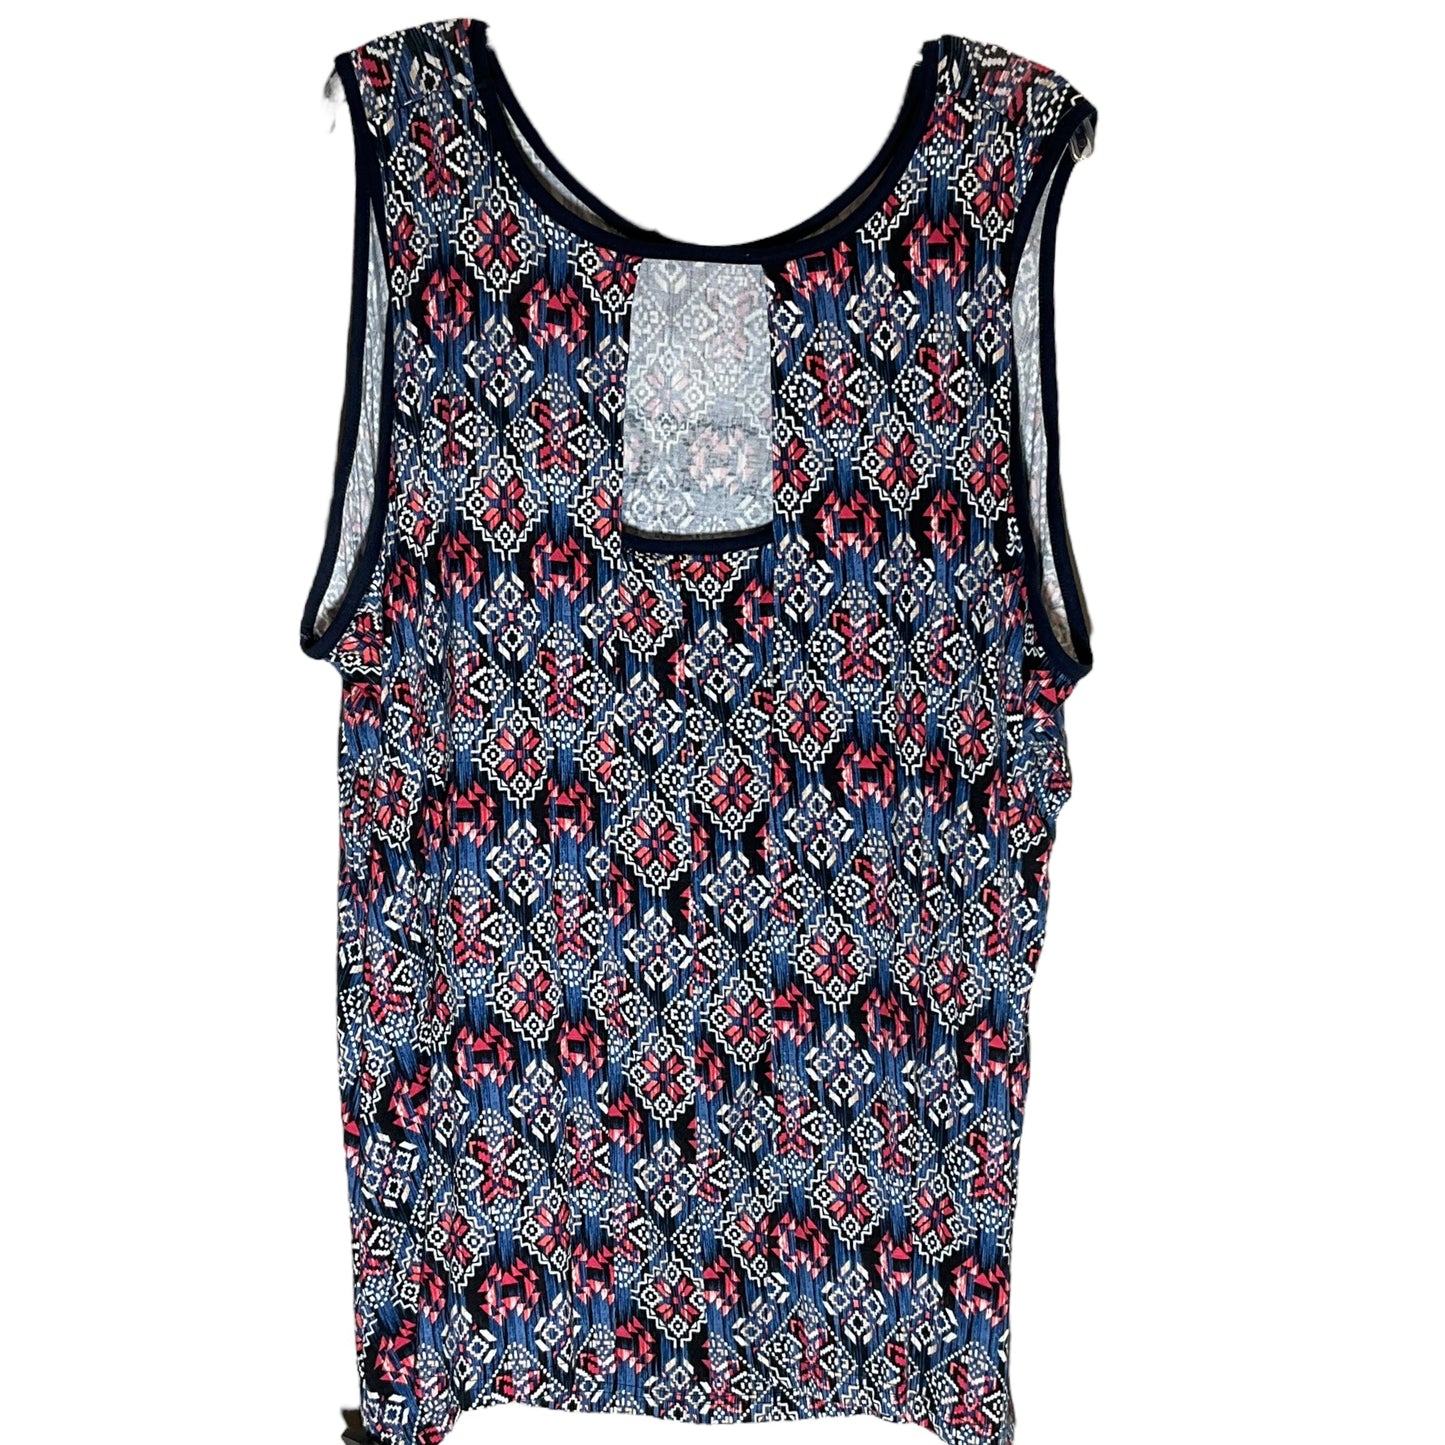 Blue Red & White Top Sleeveless Avenue, Size 4x